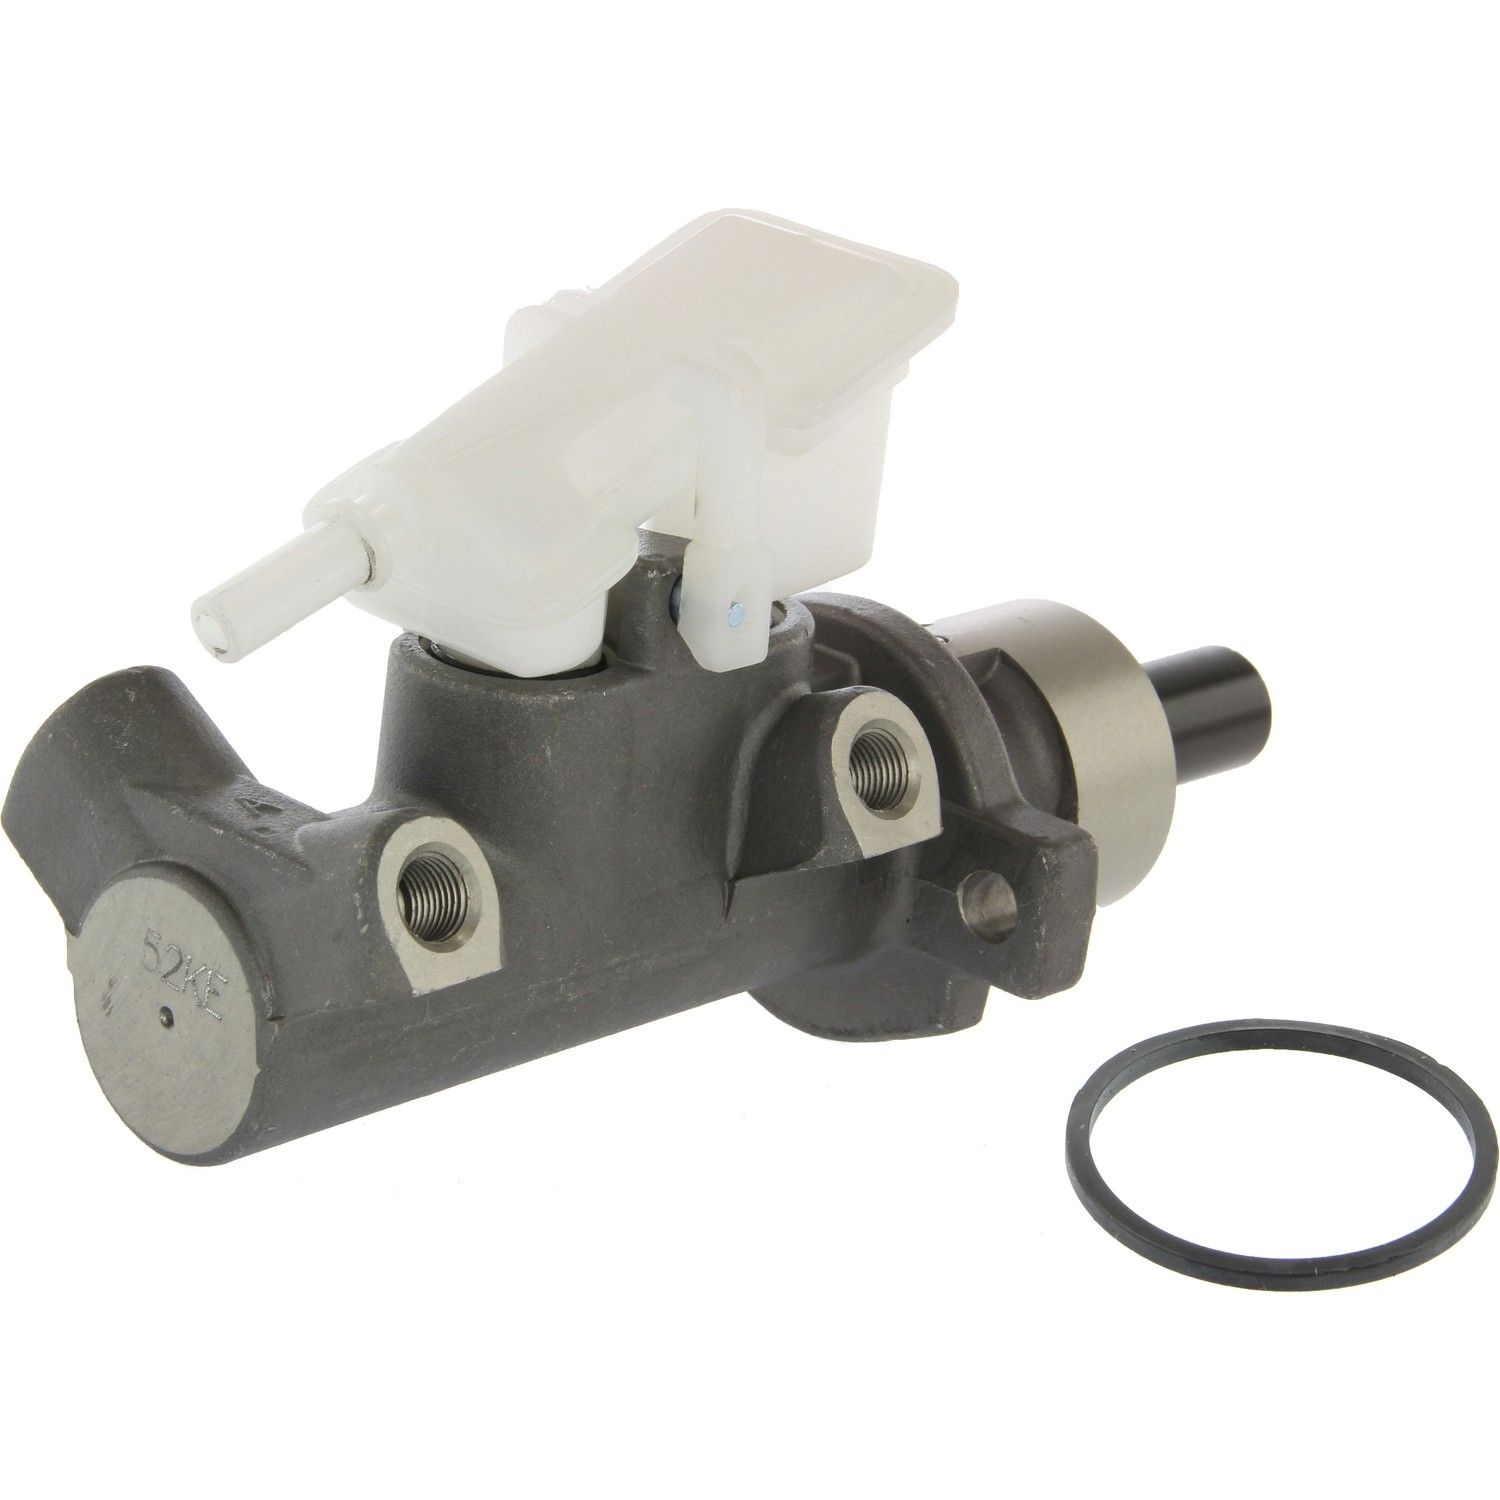 Ford Focus Brake Master Cylinder Replacement (Cardone, Centric 